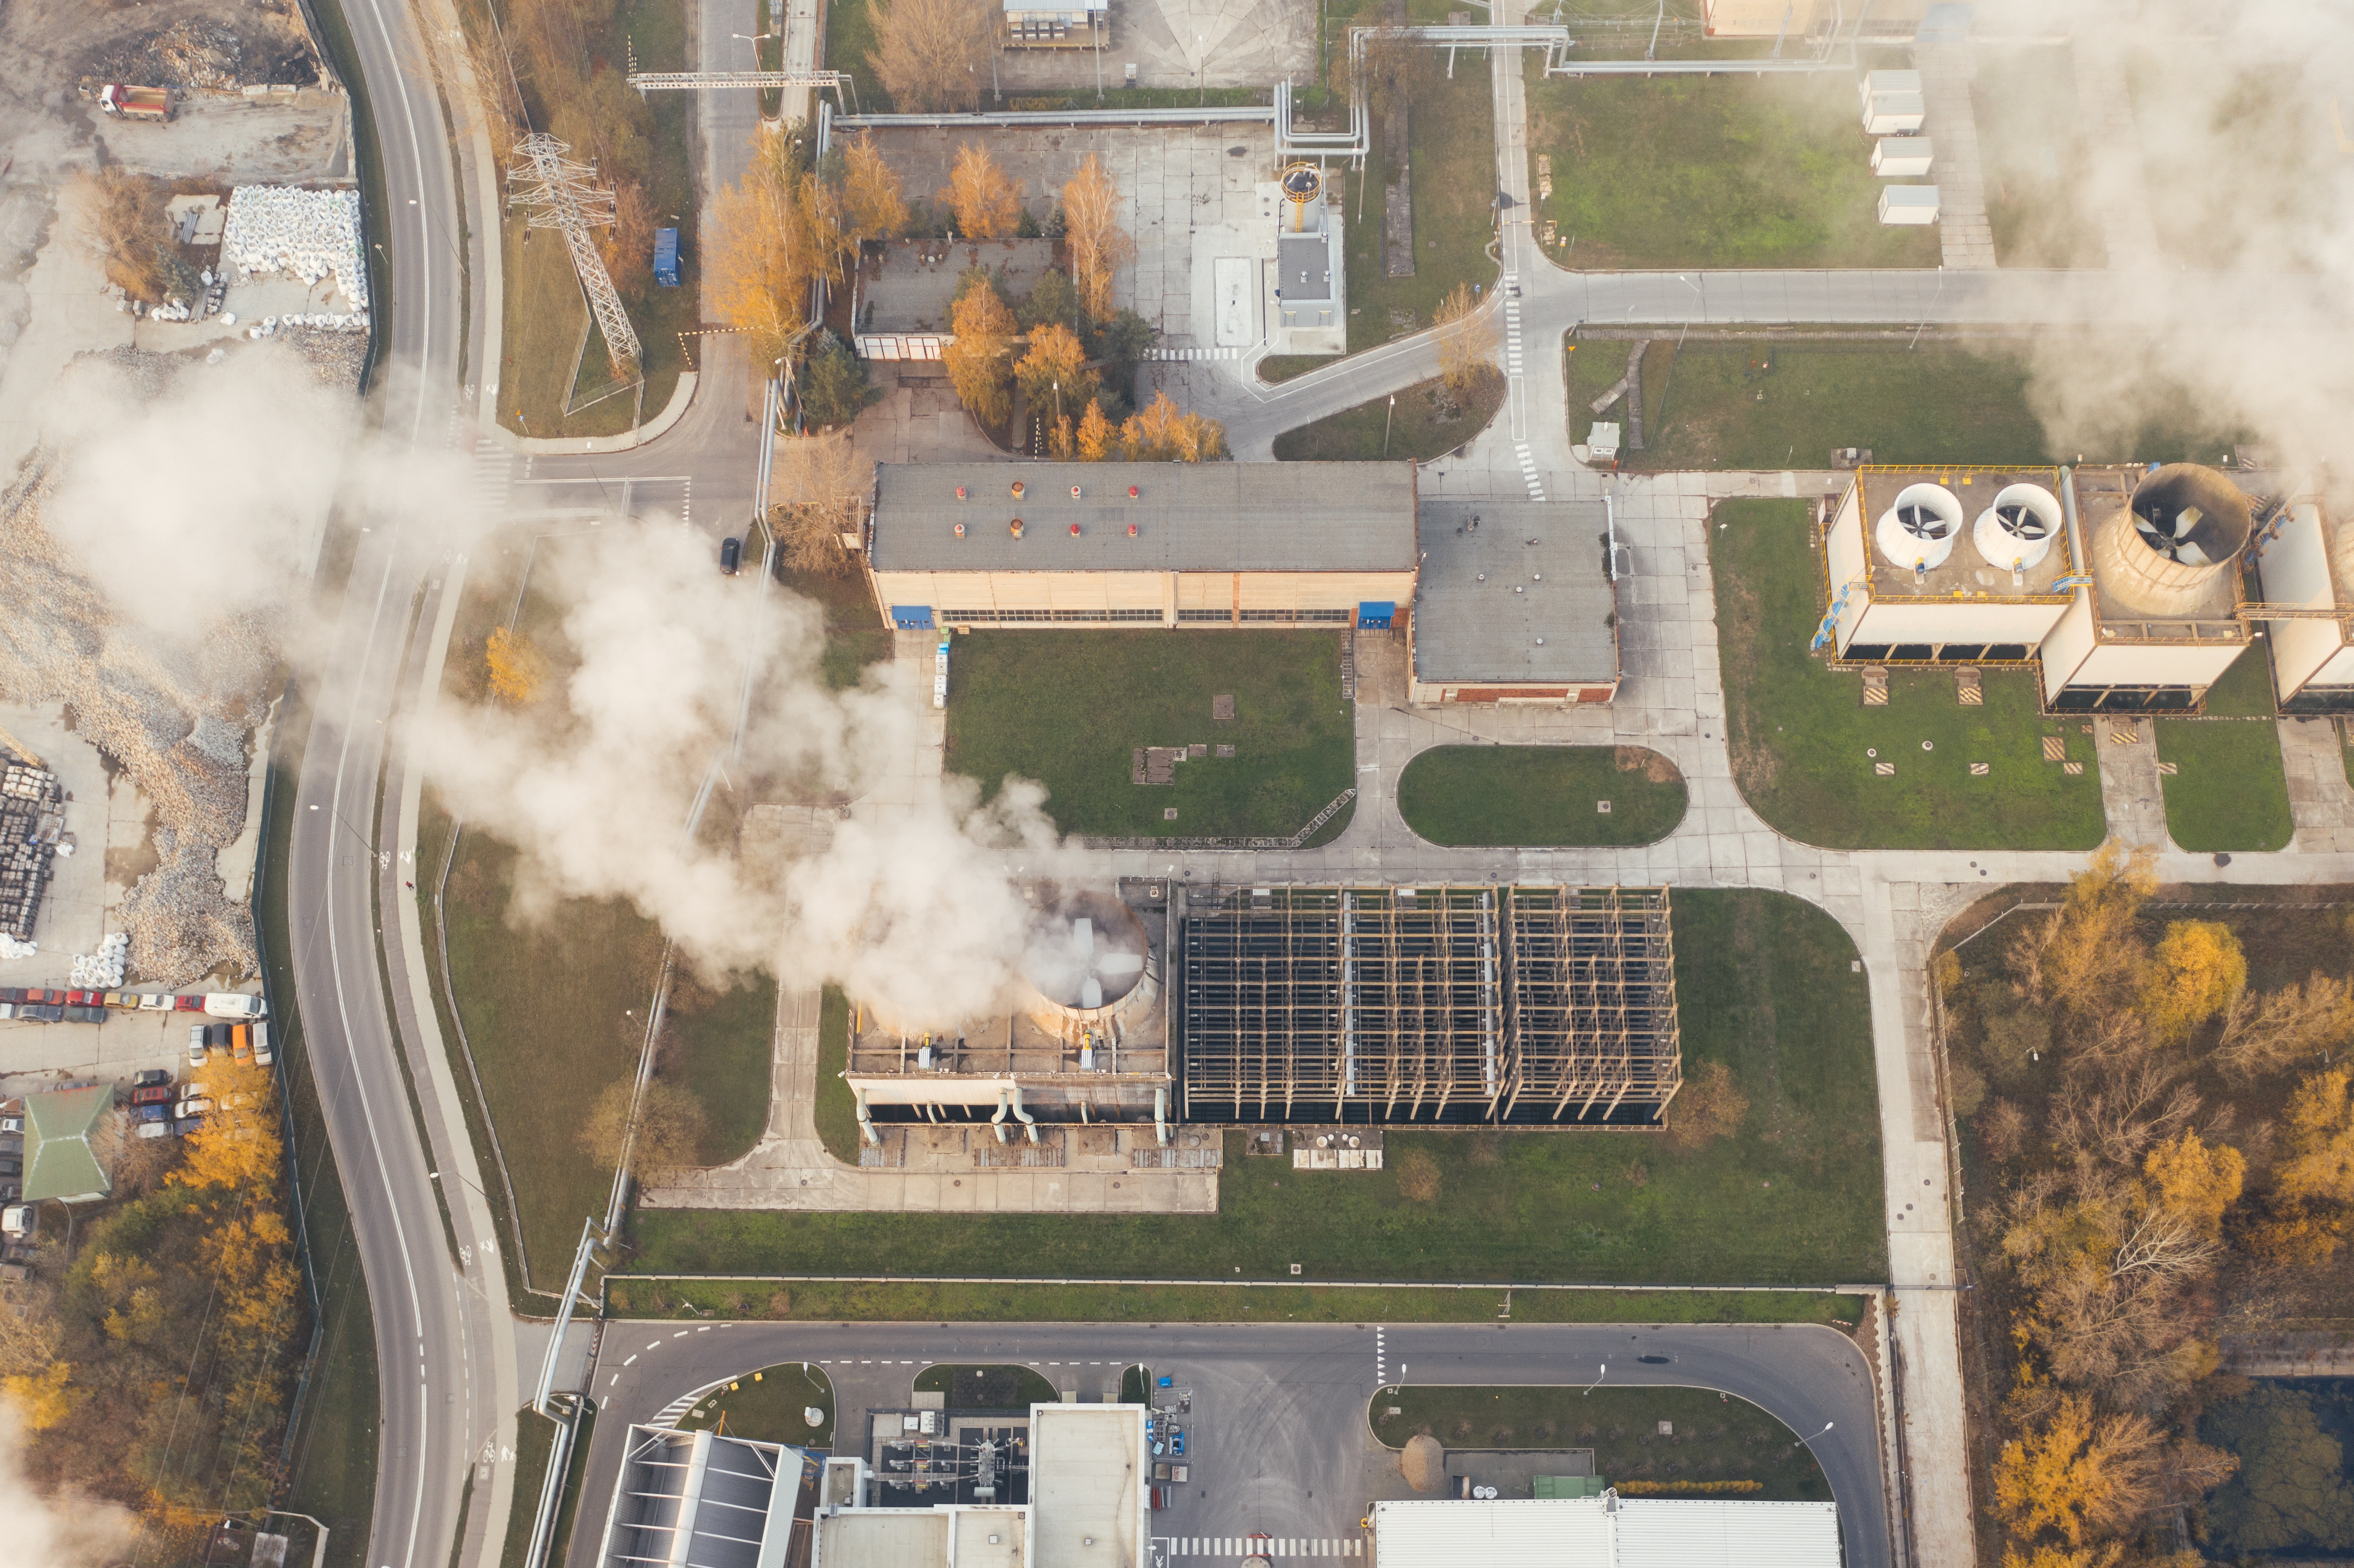 An overhead view of factory, with large smoke stacks producing clouds. 